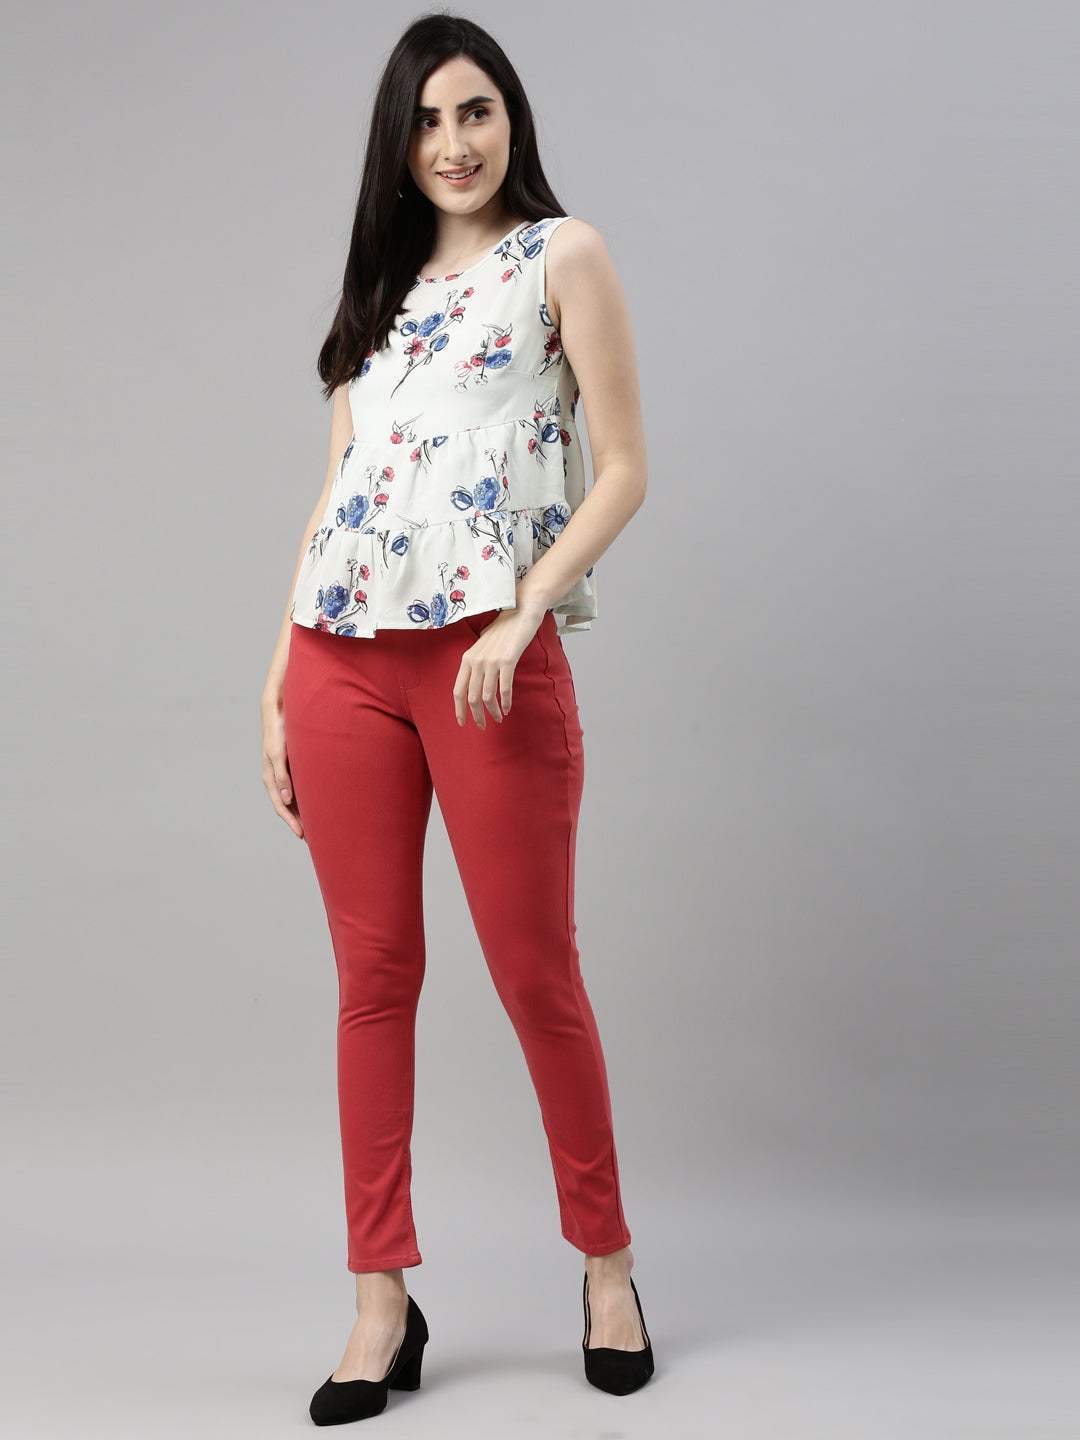 Women Solid Young Red Super Stretch Jeggings